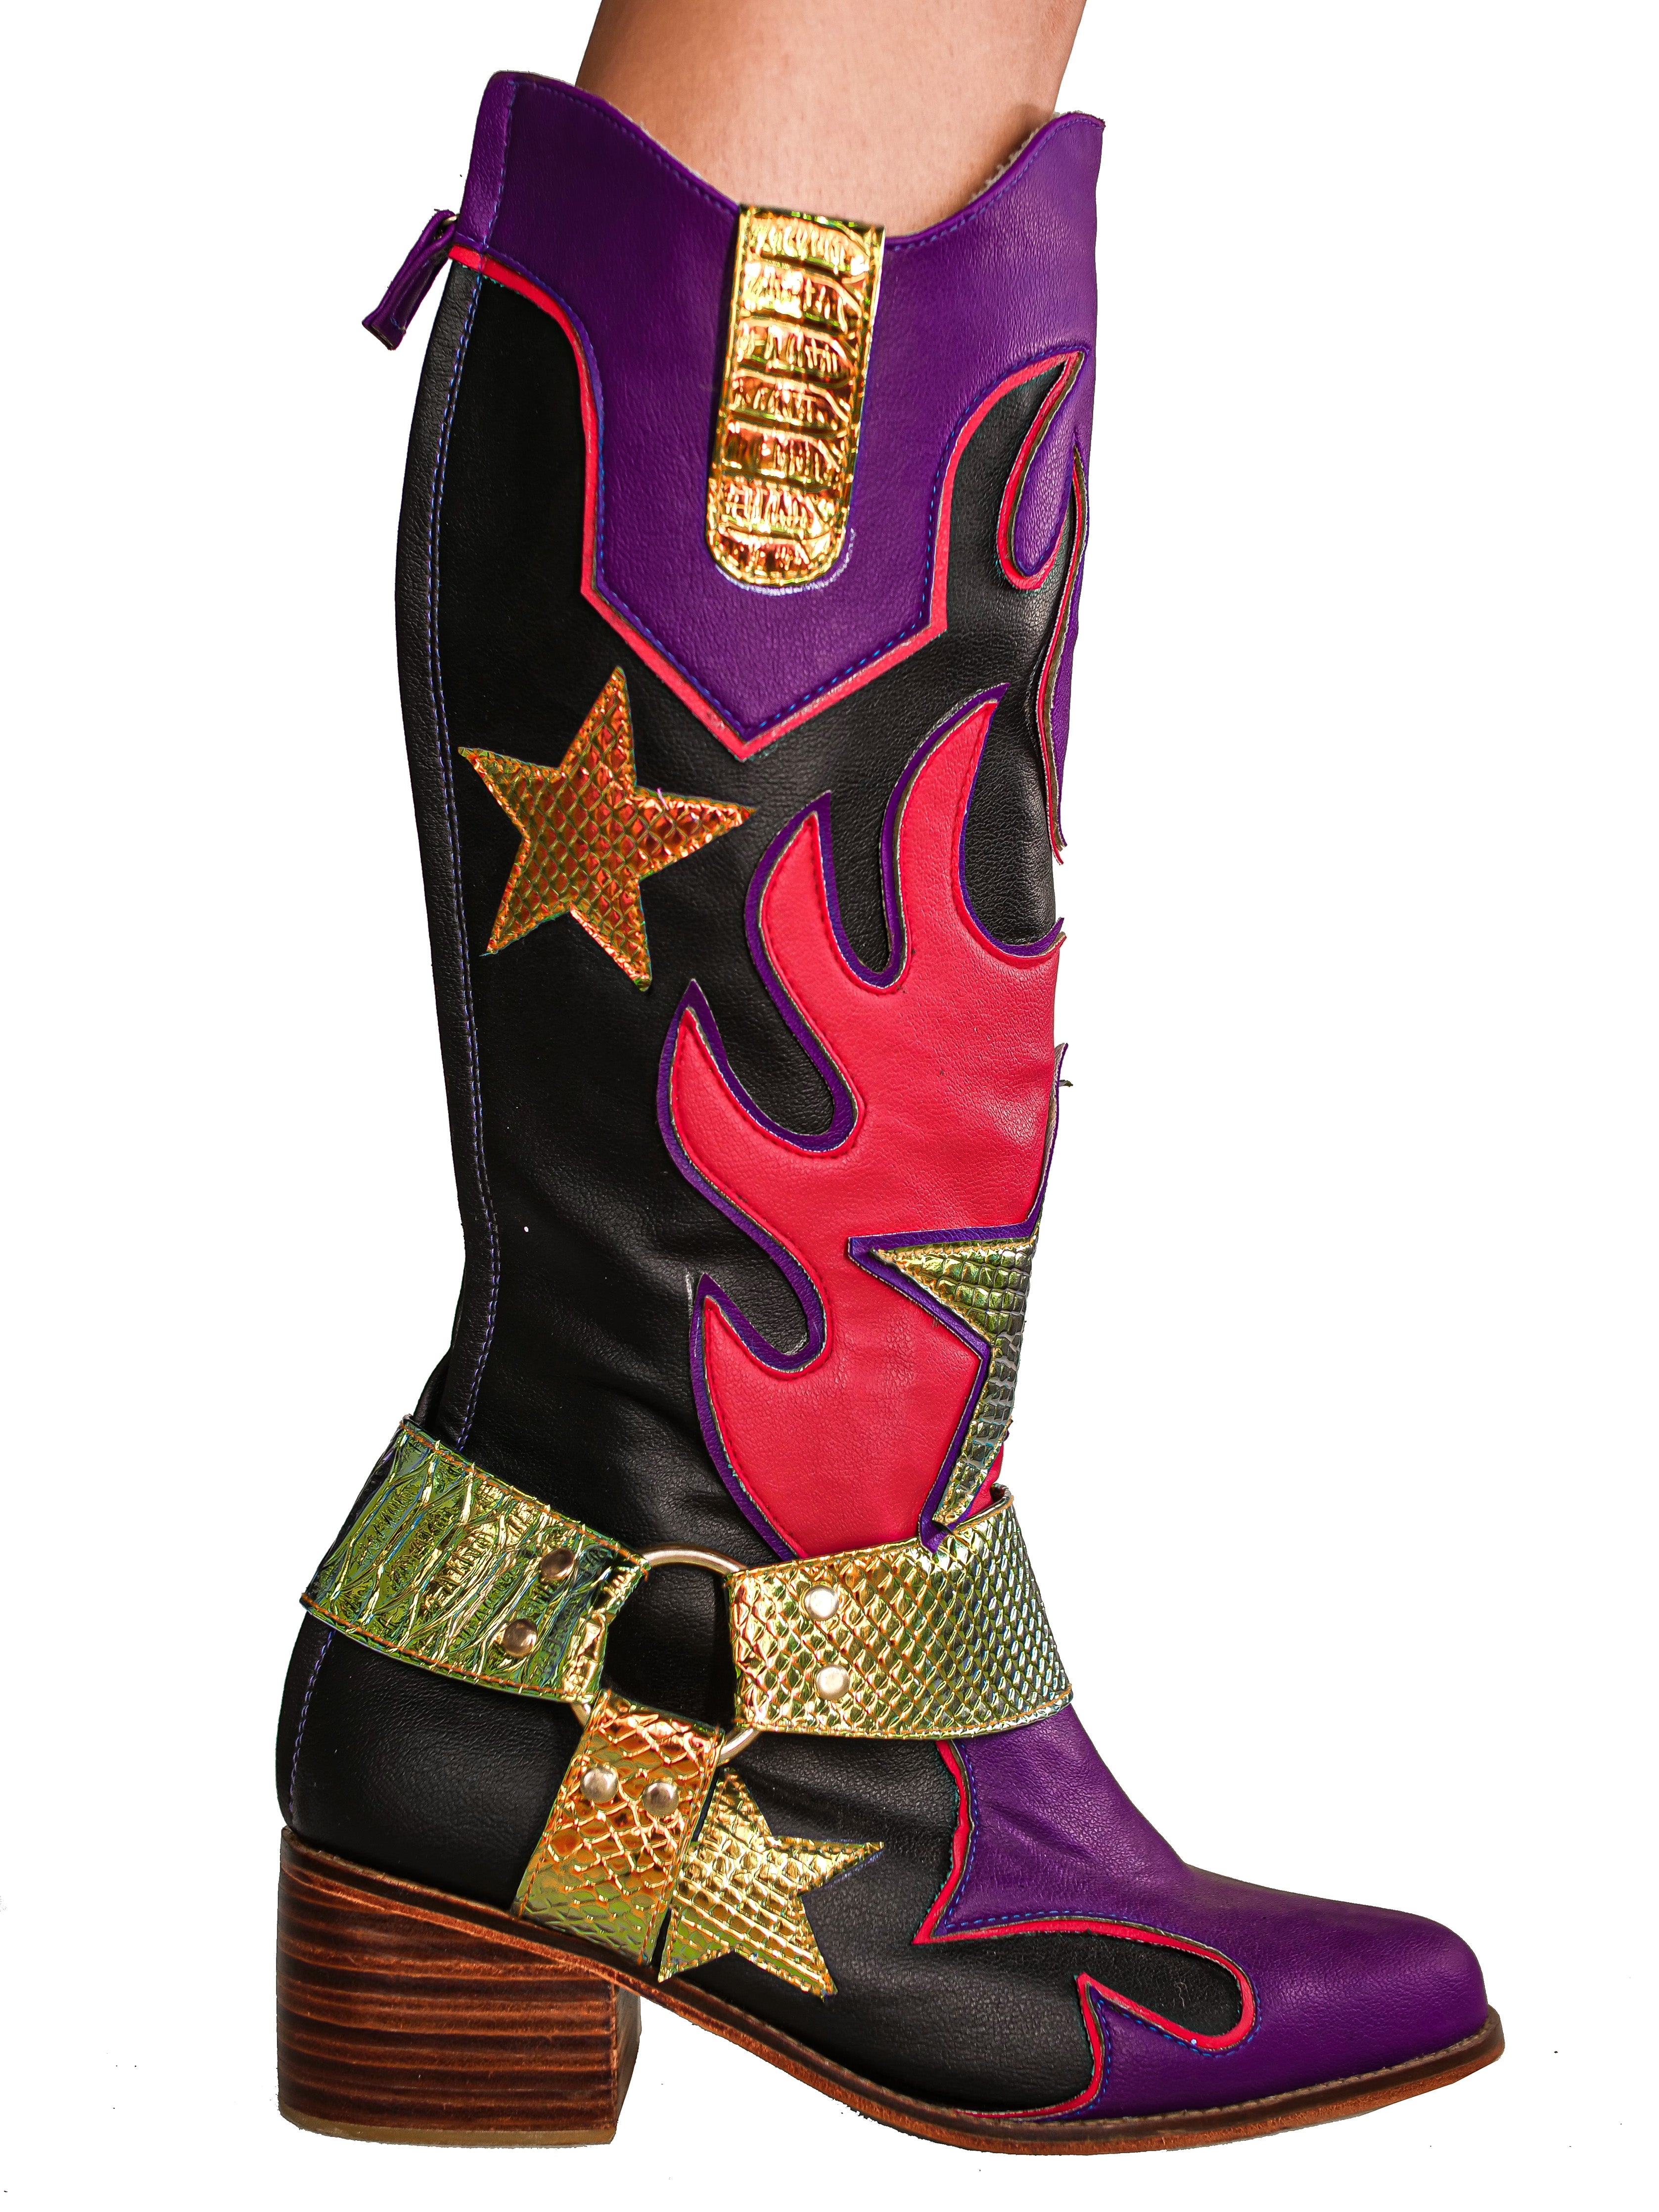 The Night Rider Cowboy Boots